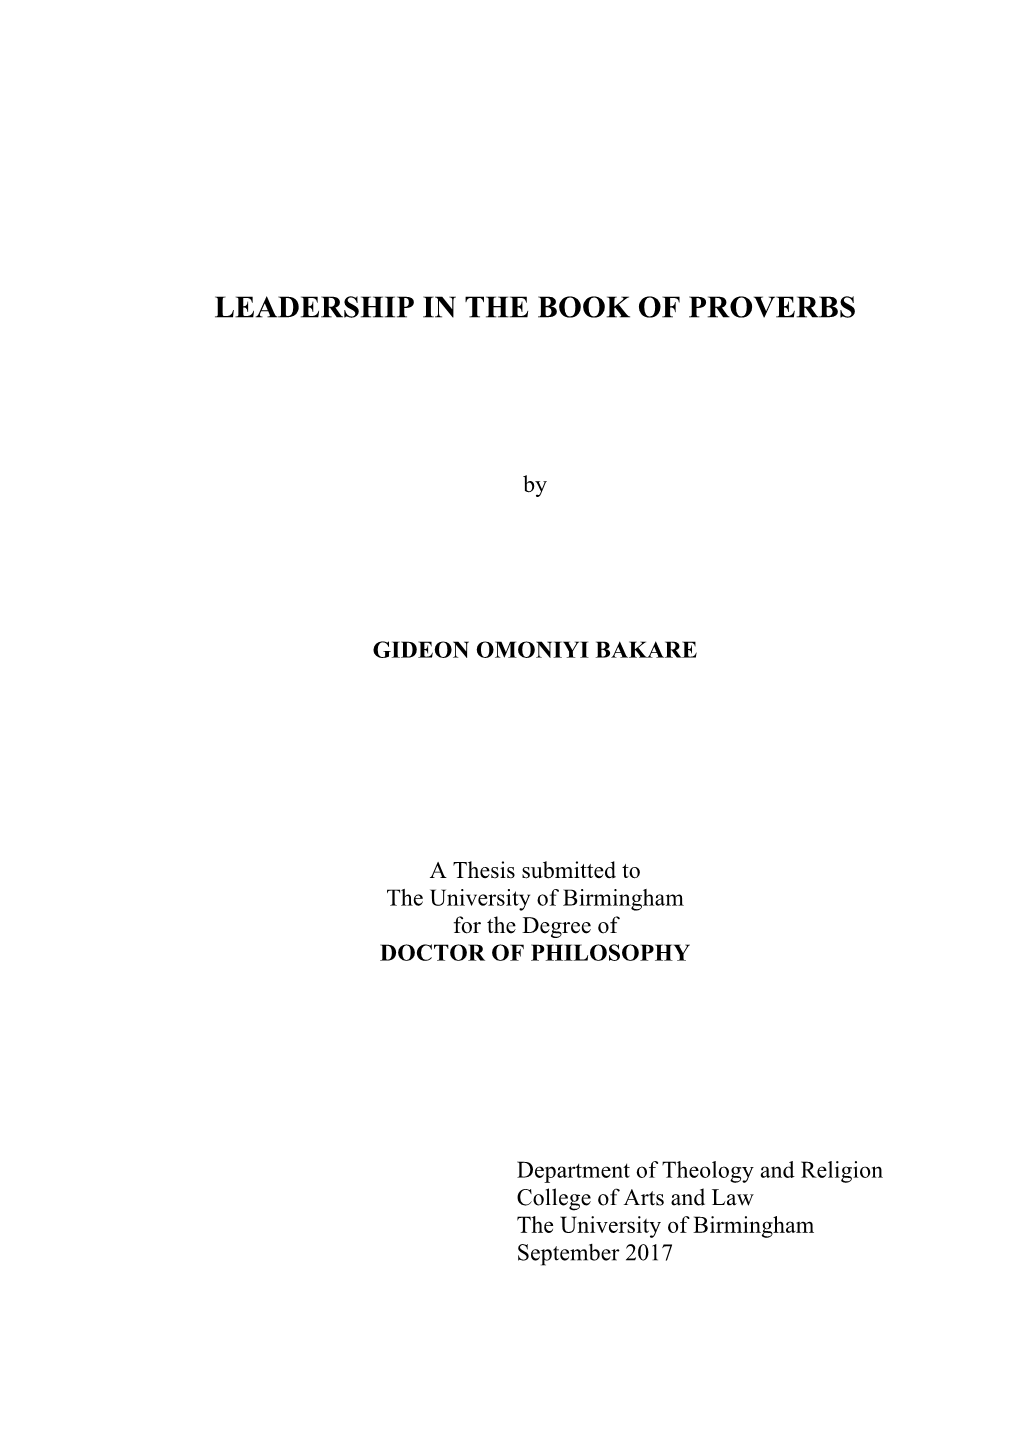 Leadership in the Book of Proverbs